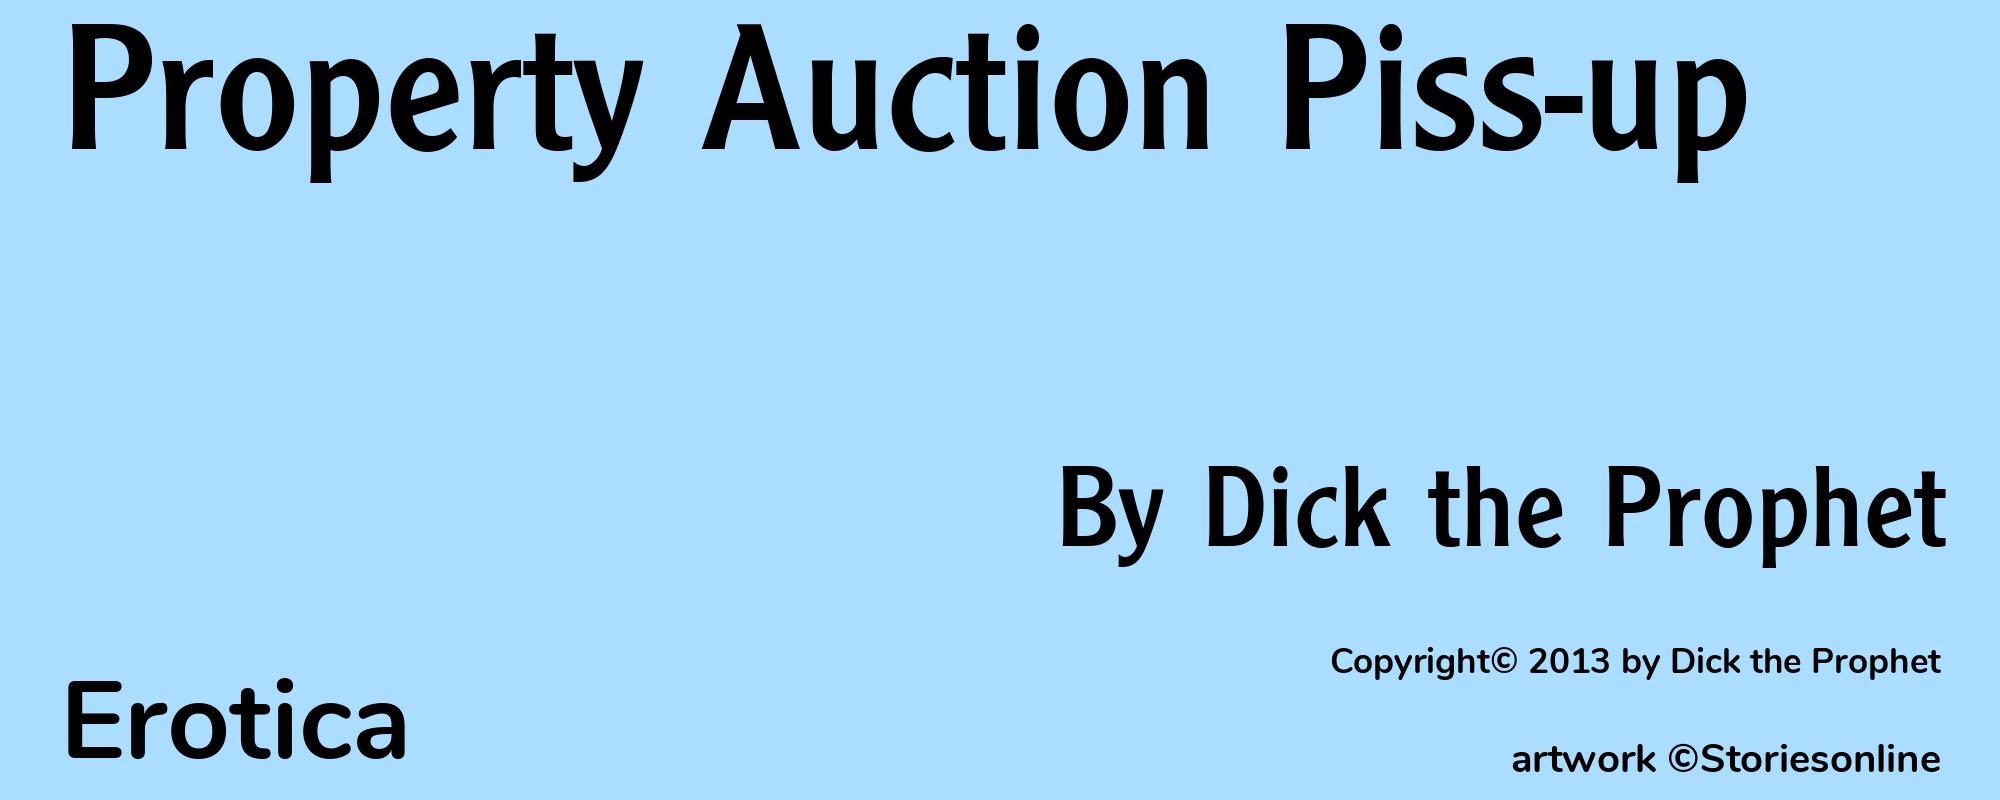 Property Auction Piss-up - Cover